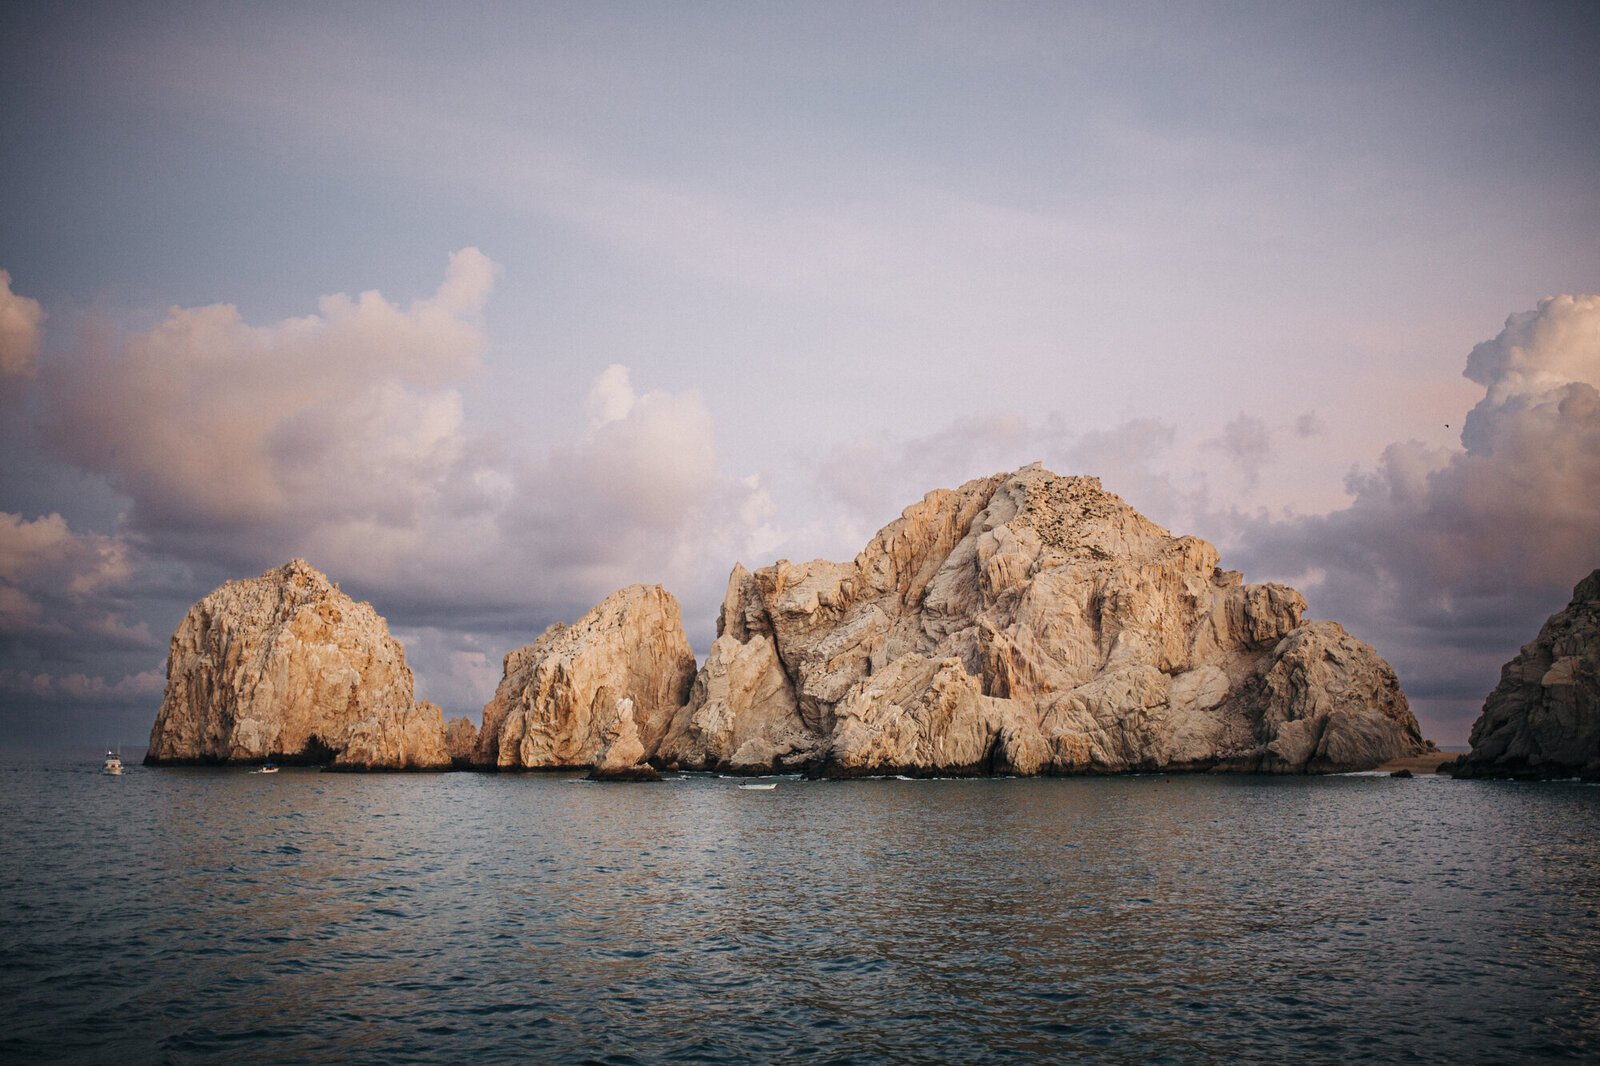 Rocky outcrop by the sea under a cloudy sky at sunset, captured by a traveling wedding photographer.